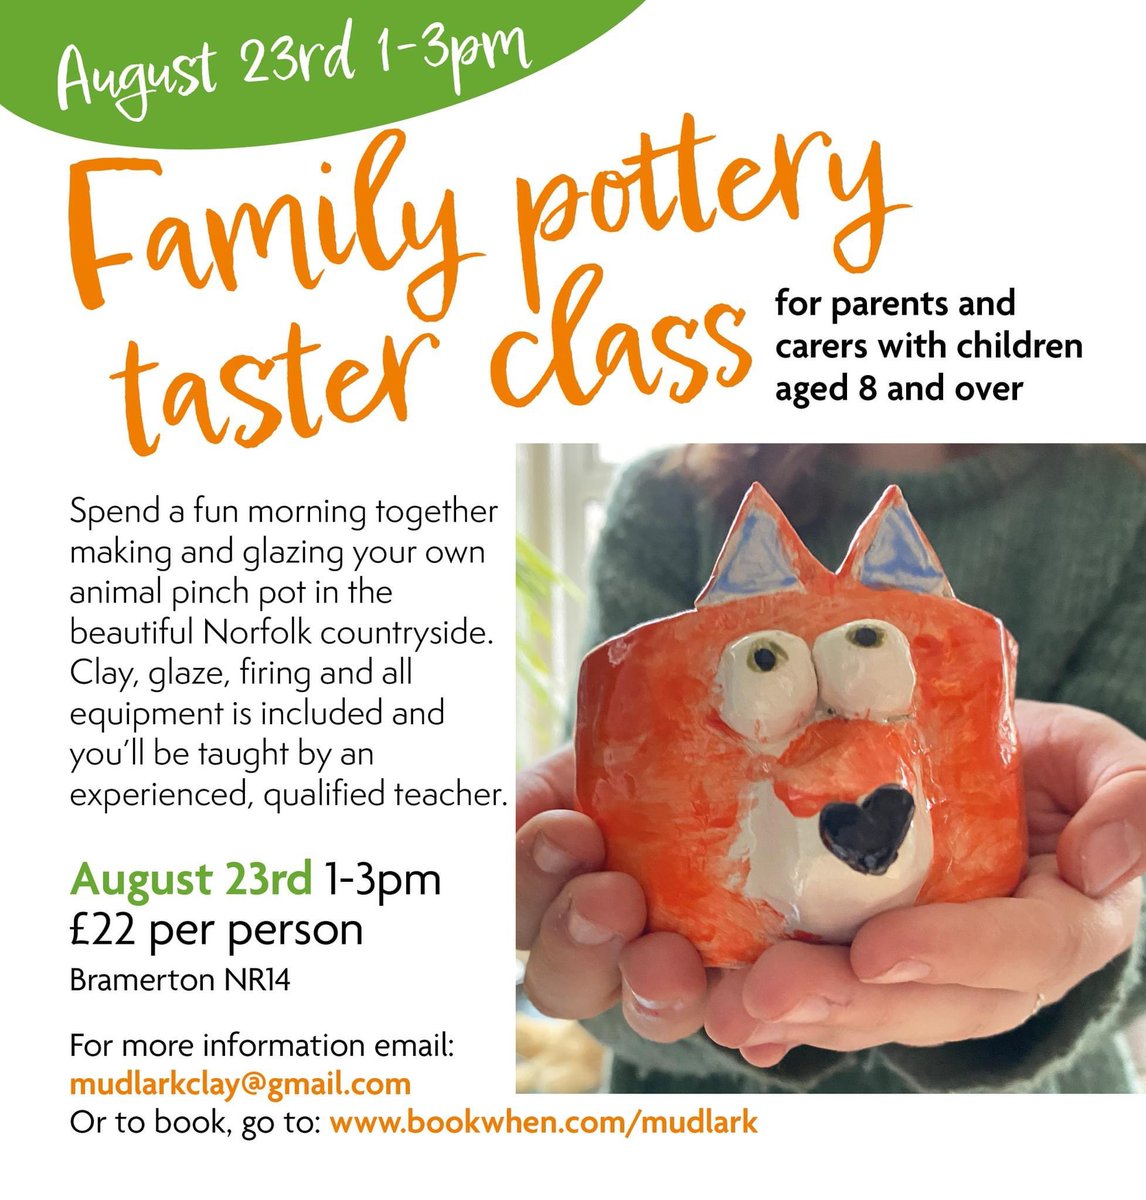 Get creative with clay this summer!
Make and glaze an animal pinch pot of your own. Everything you need is supplied, including clay, glaze and firing. To book: bookwhen.com/mudlark
#summeractivities #learnpottery #whatsoninnorfolk #norwichevents #norwichlife #mhhsbd